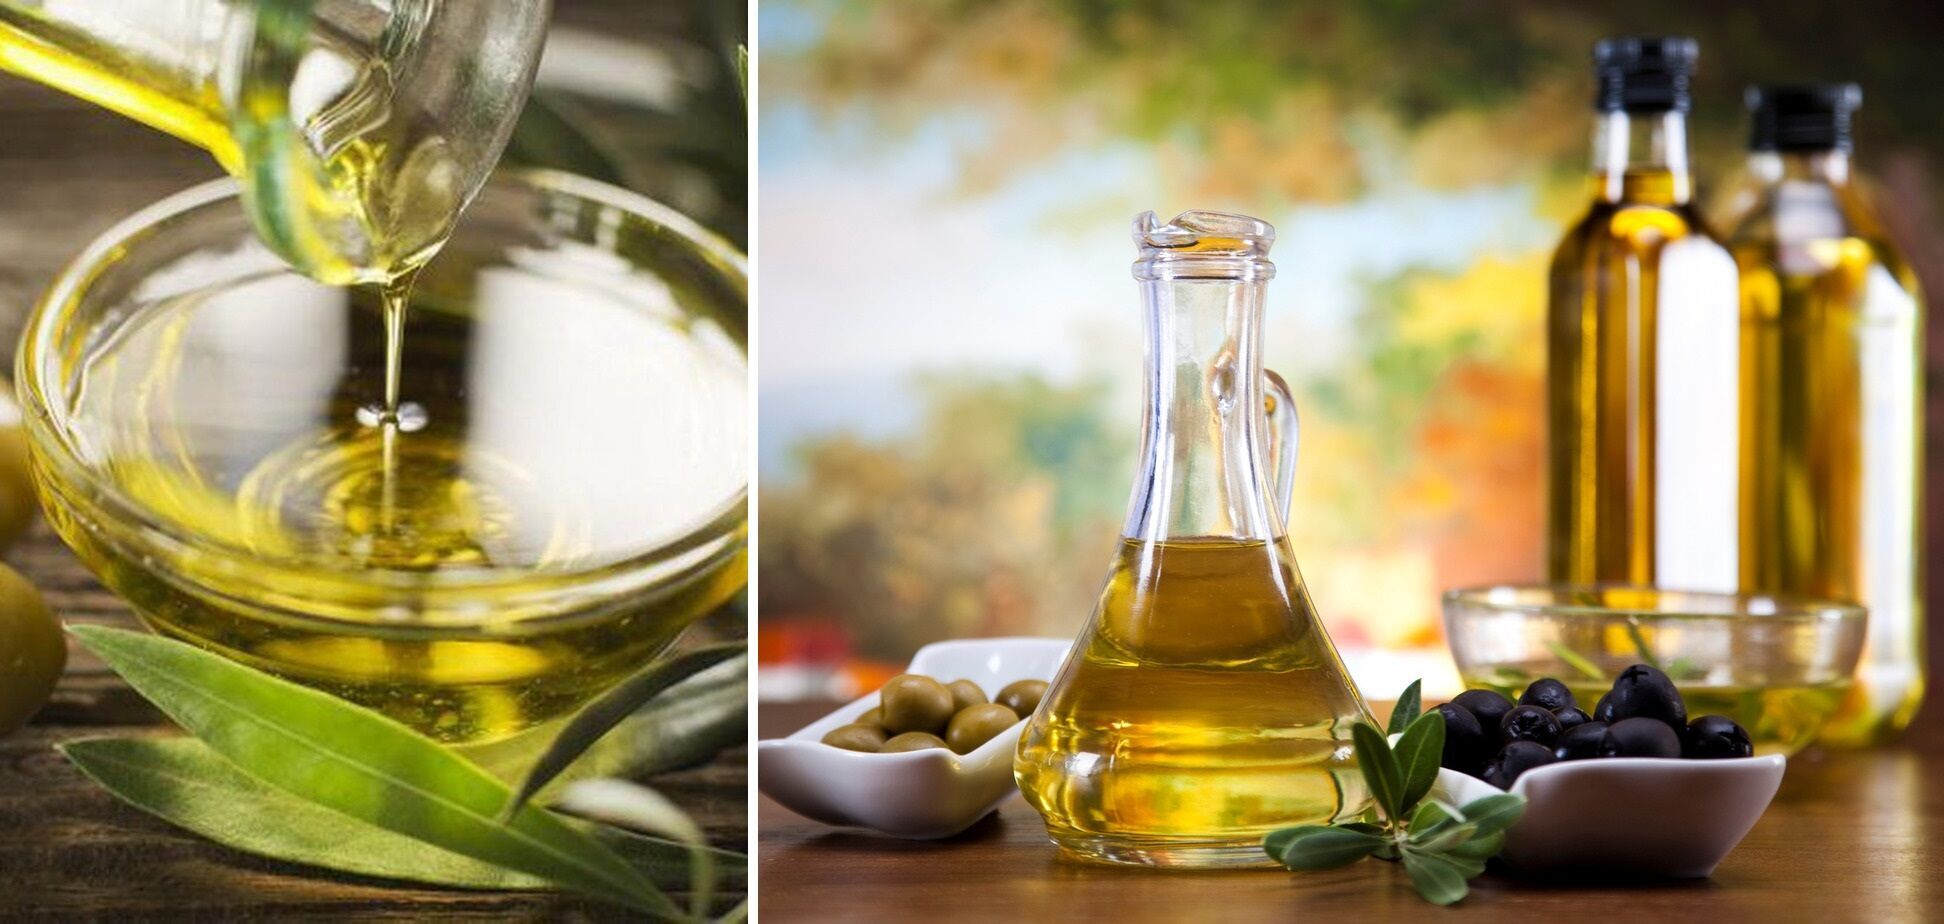 Olive oil to dress a salad with